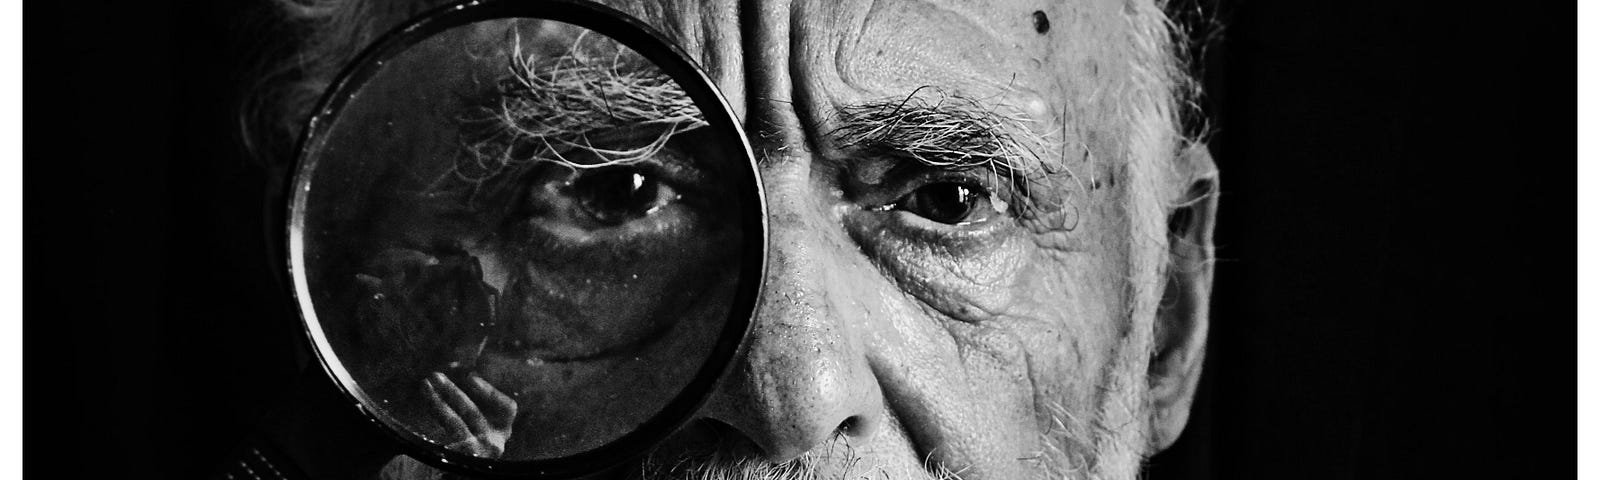 portrait of an old man looking through a magnifying glass